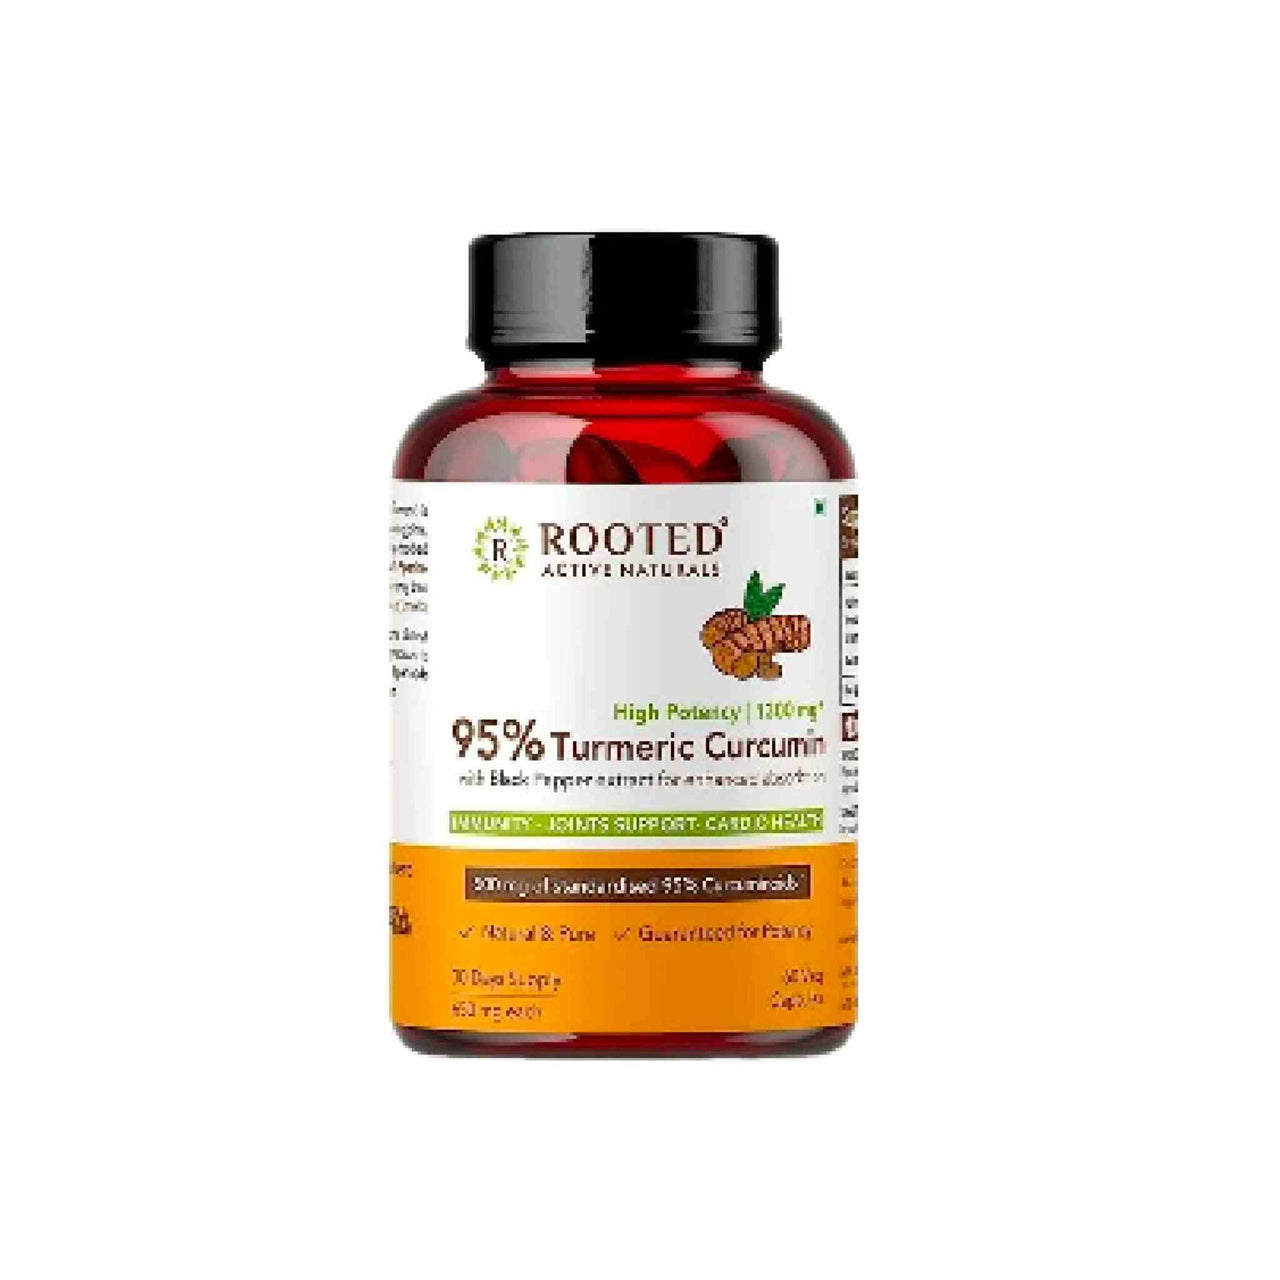 Rooted Curcumin (95%) with Black pepper Extract (for better absorption),1300mg, for Immunity, Joints Cardio Health| 60 VEG Capsules, 650 Mg each